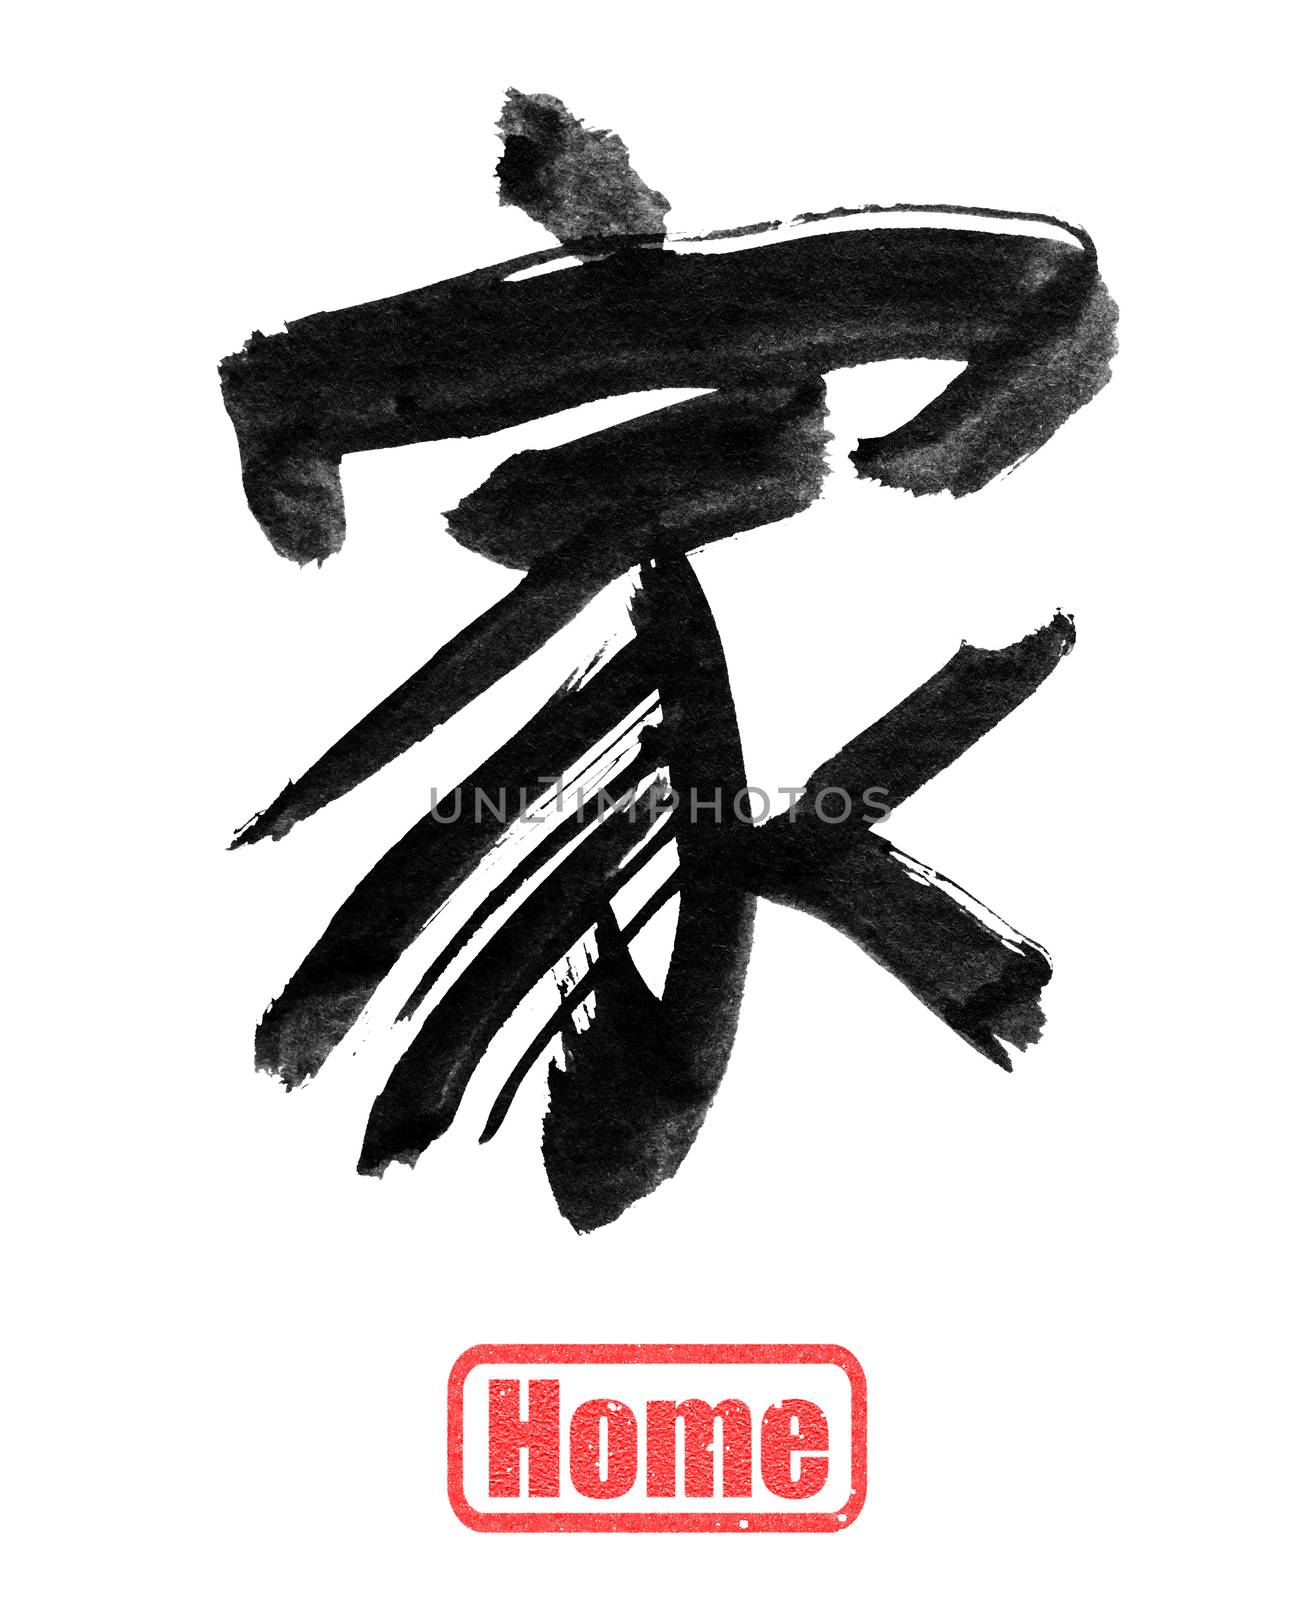 Home, traditional chinese calligraphy by elwynn